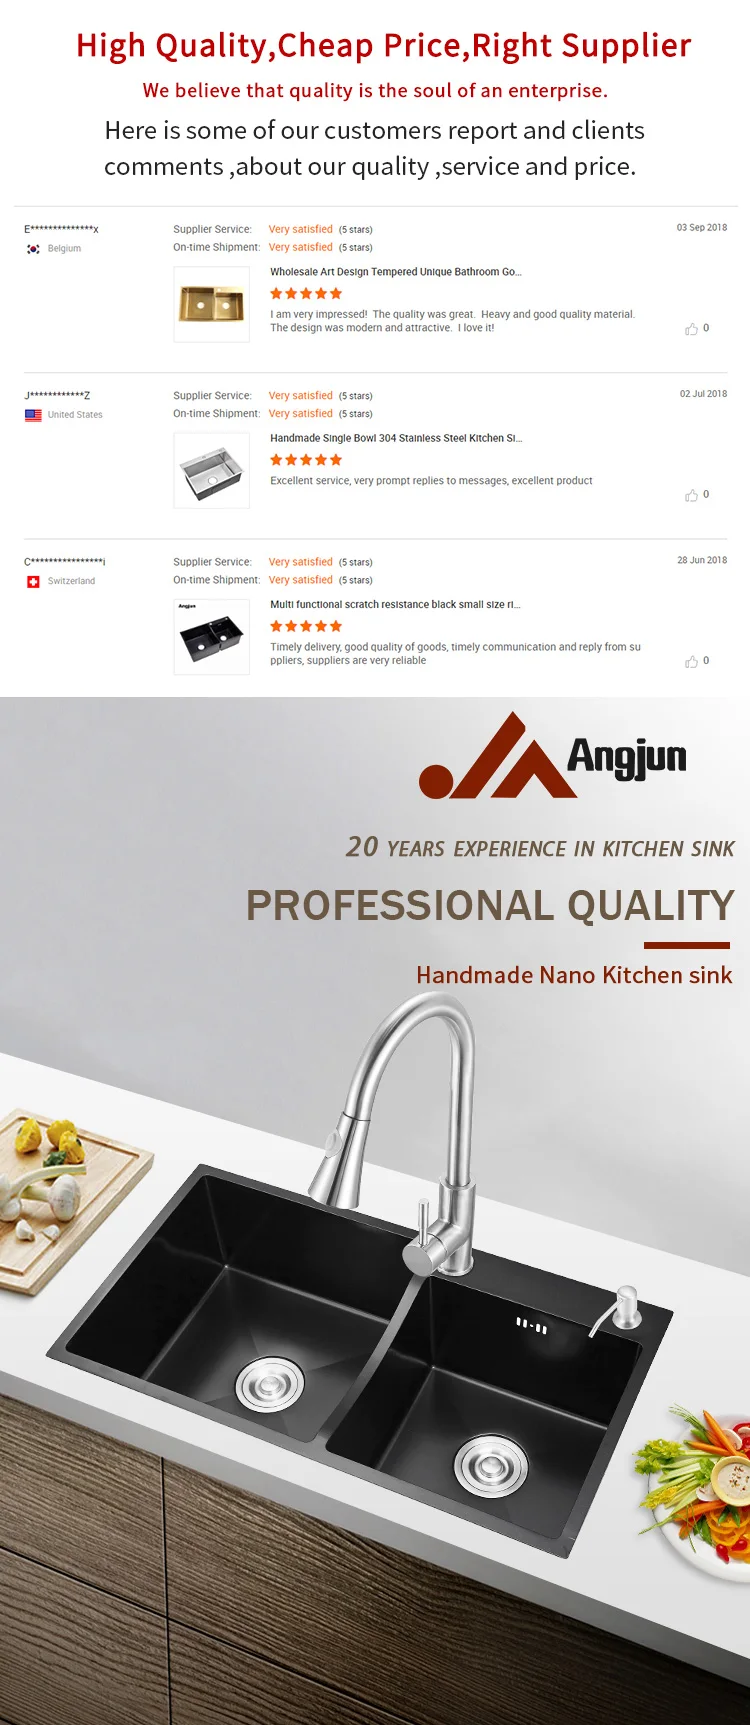 Popular Sink Price In Pakistan Philippines Japan Kitchen Sink Made In China Buy Sink Price In Pakistan Philippines Kitchen Sink Japan Kitchen Sink